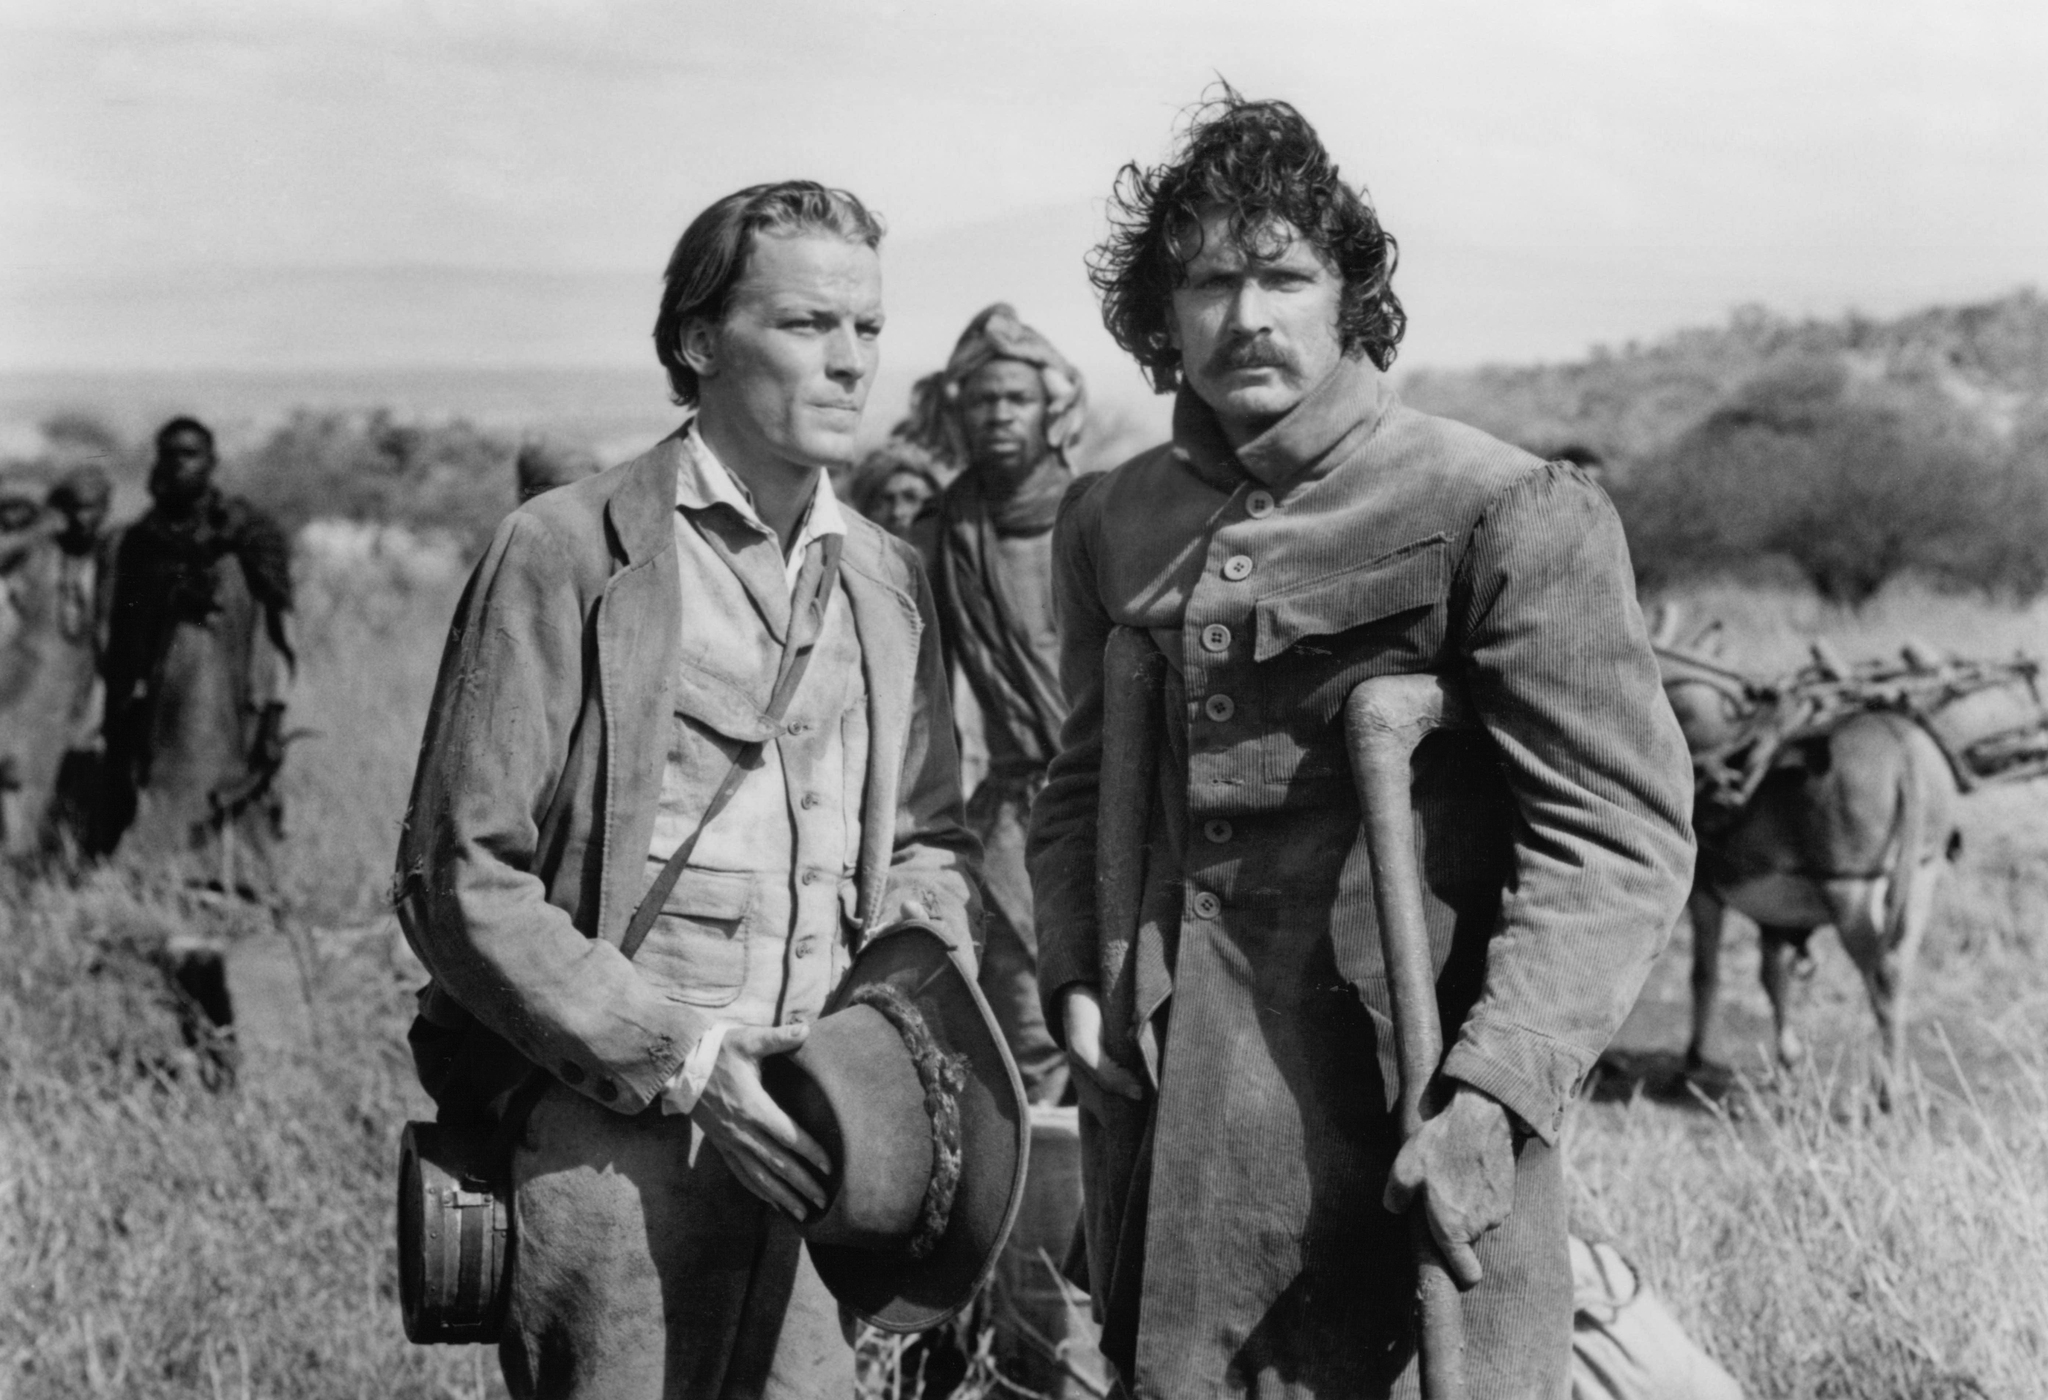 Still of Patrick Bergin and Iain Glen in Mountains of the Moon (1990)